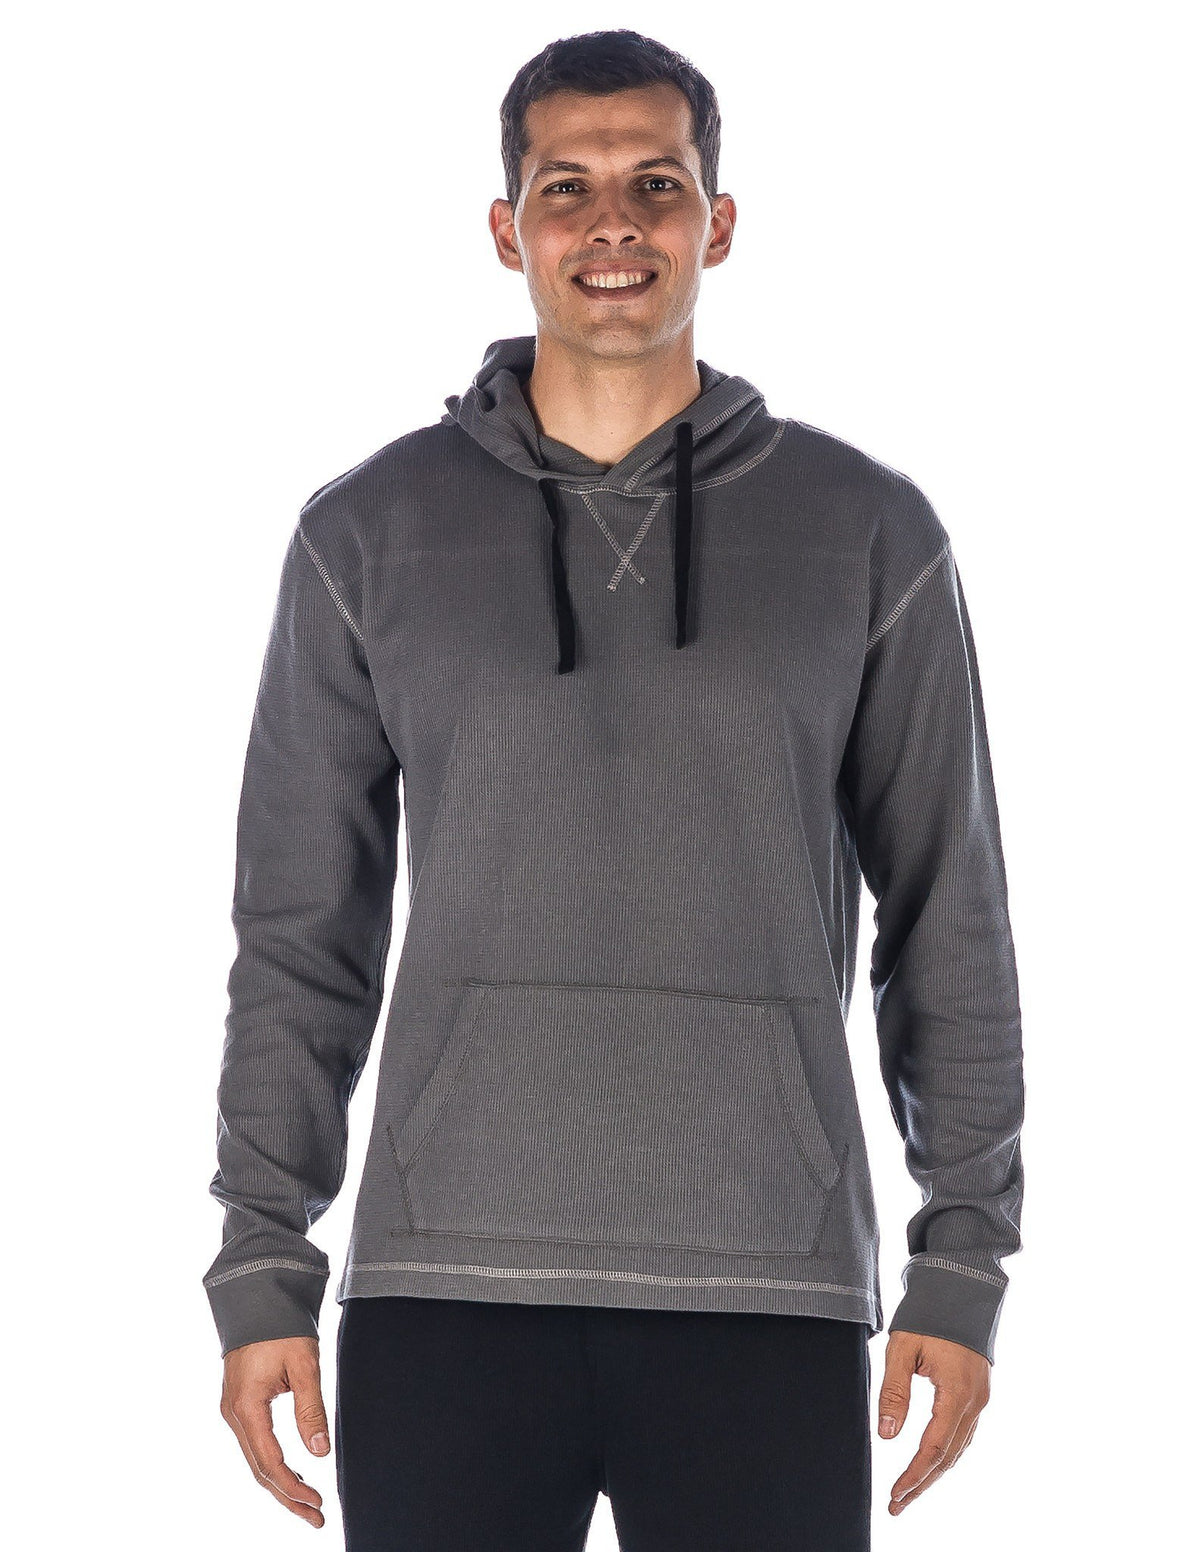 Men's Solid Thermal Lounge Hoodie - with Contrast Stitching - Charcoal